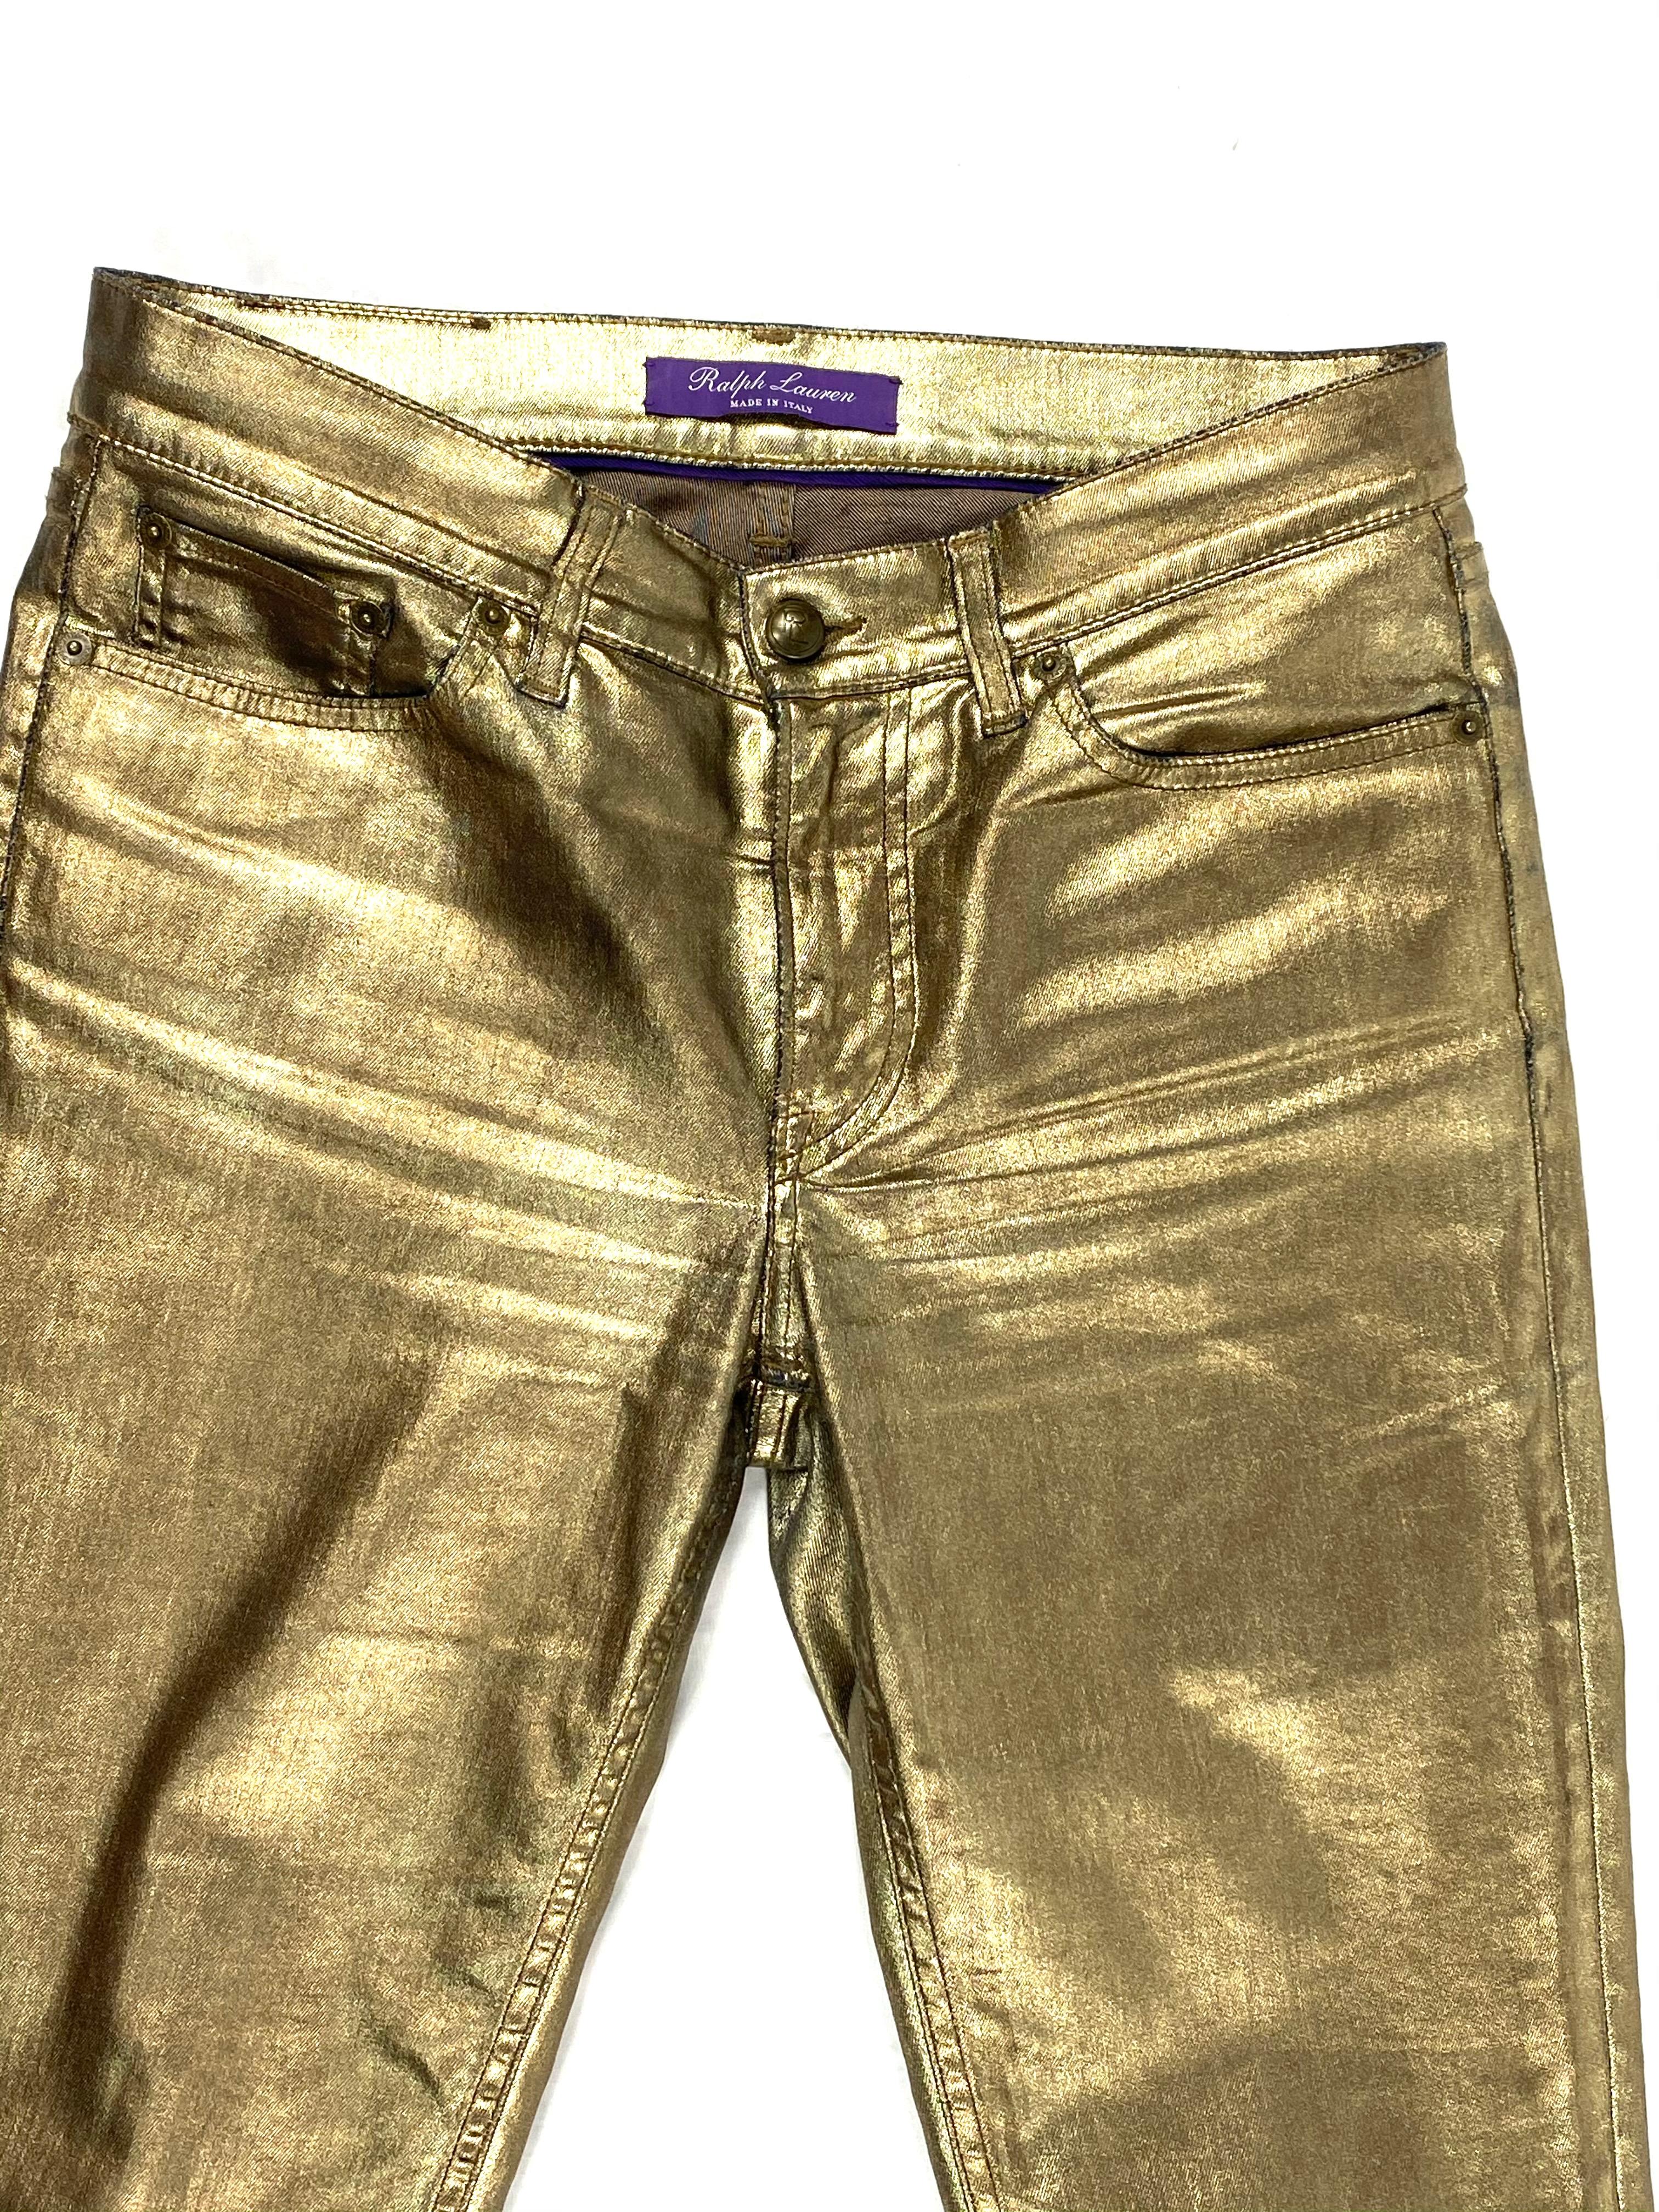 Product details:

Featuring metallic gold coated stretch skinny fit jeans.